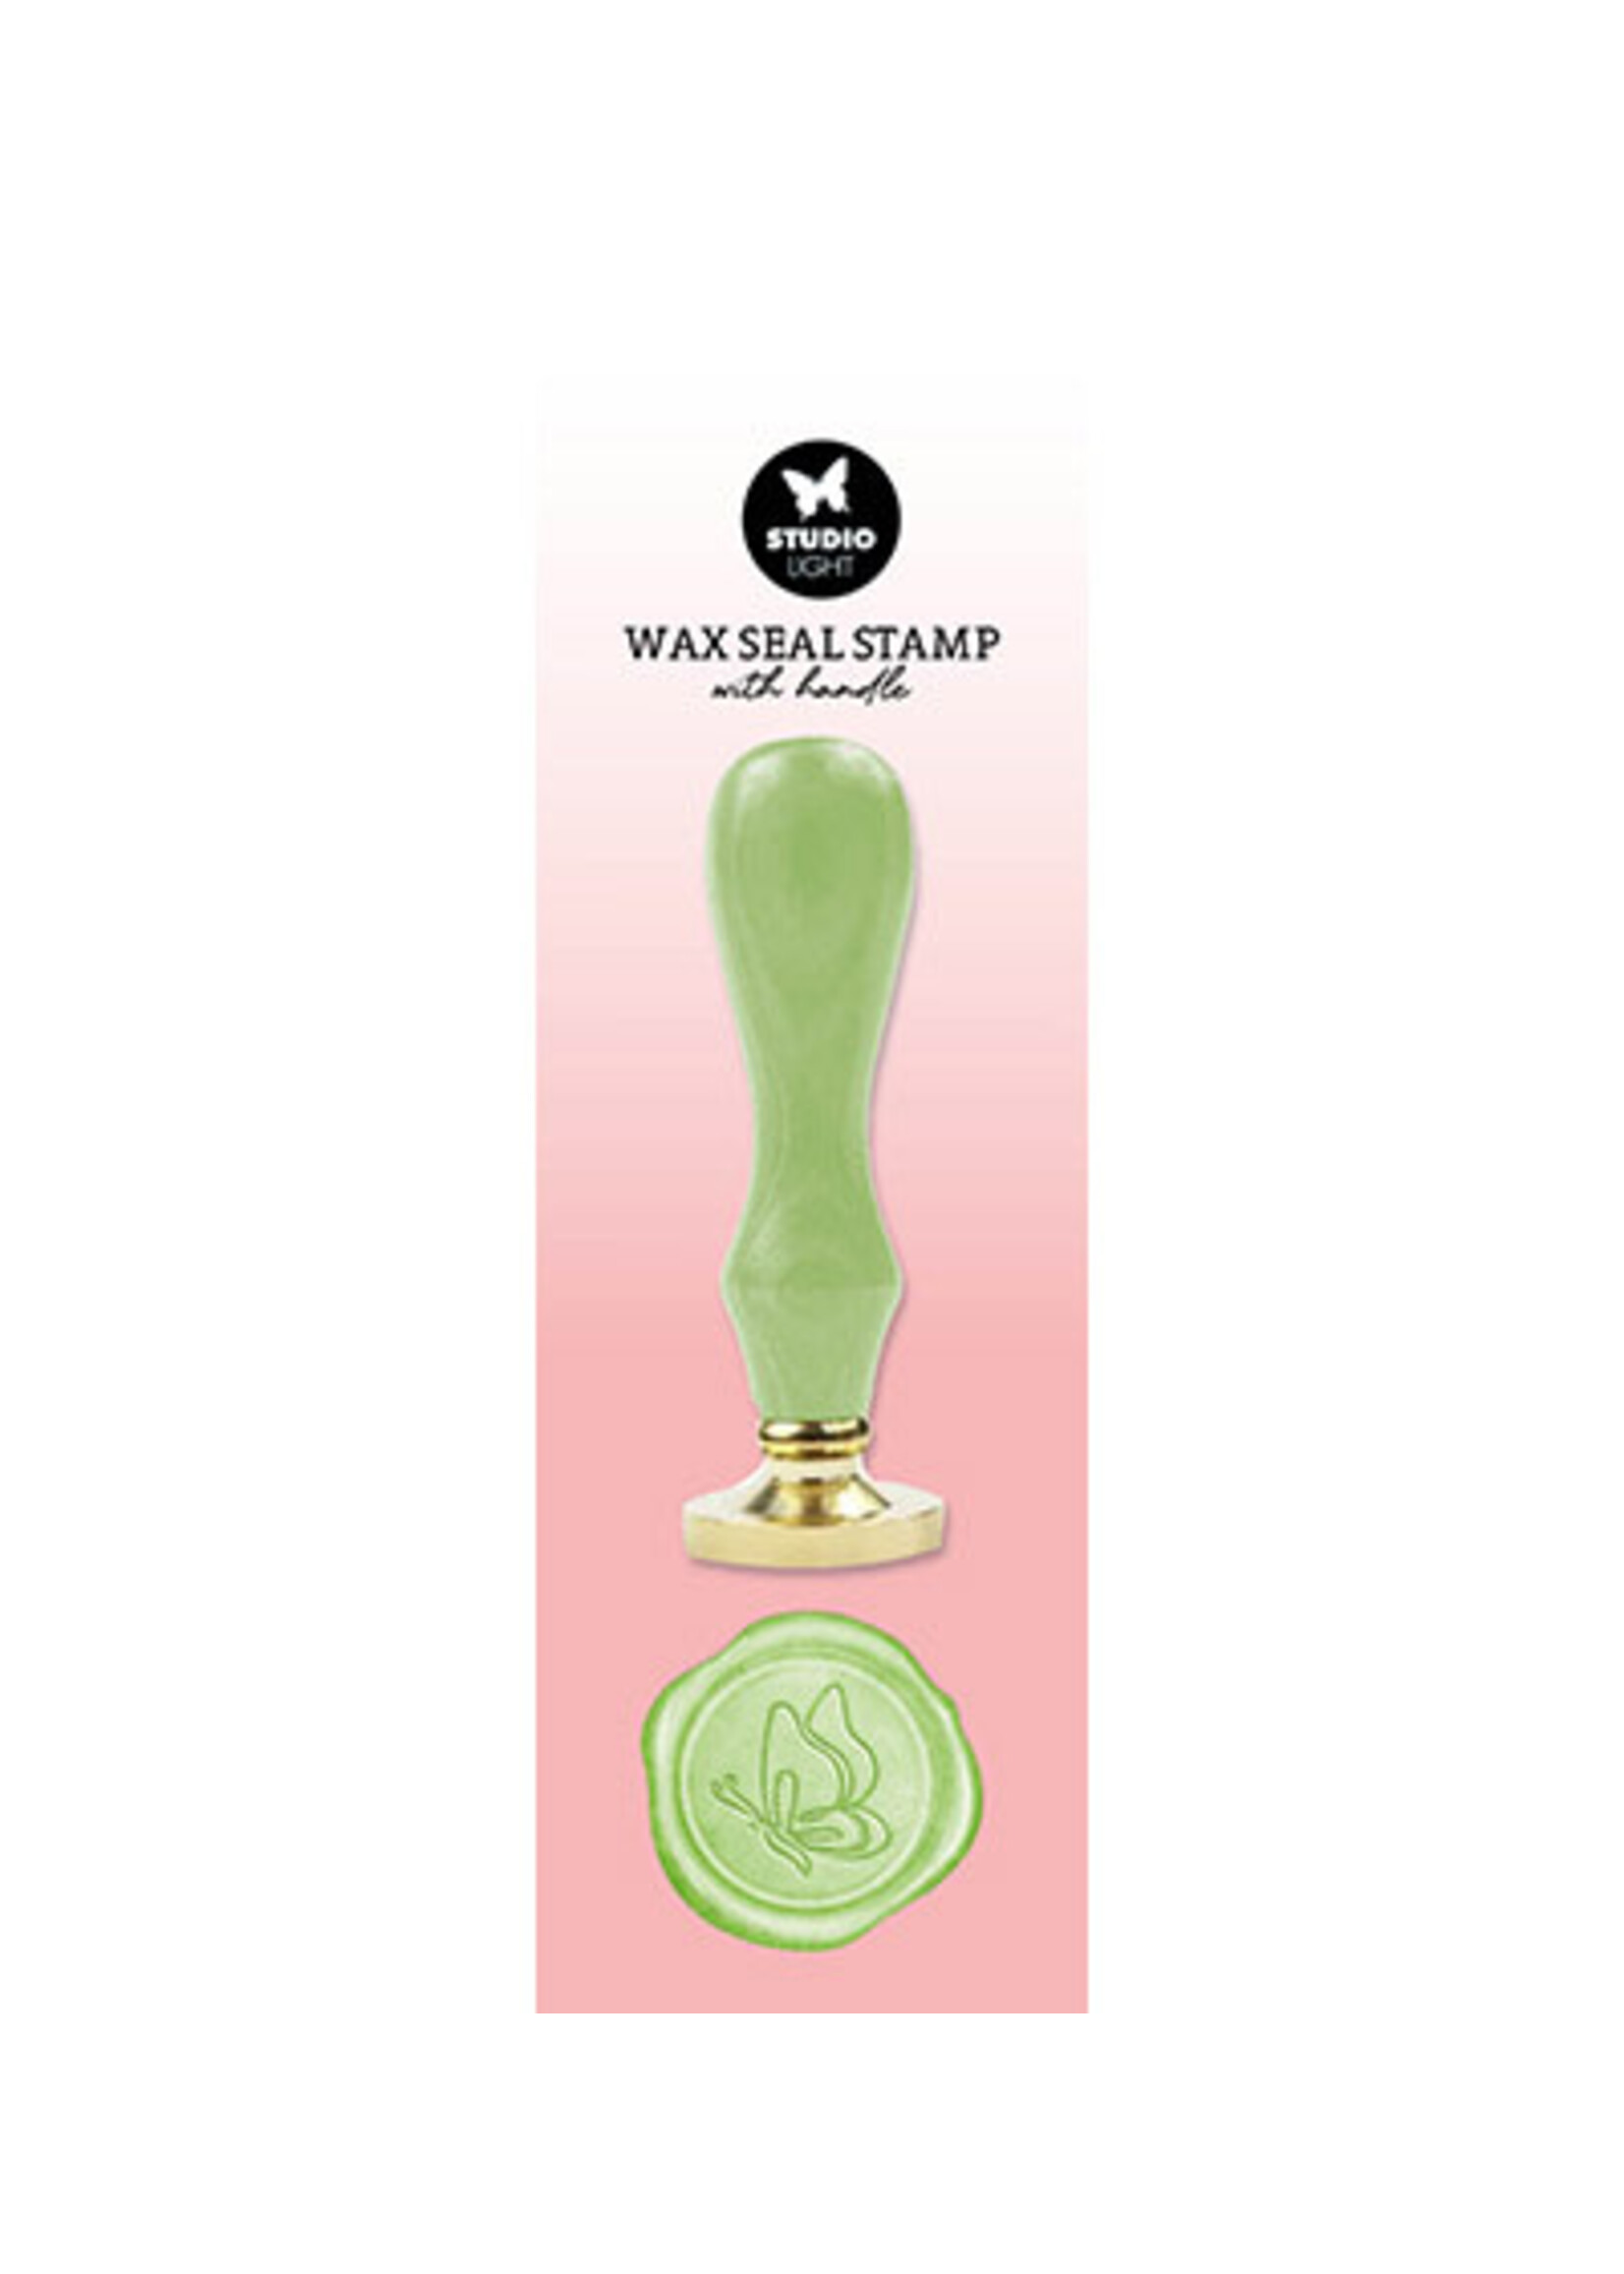 Studio Light SL-ES-WAX10 - Wax Stamp with handle Green butterfly Essentials Tools nr.10